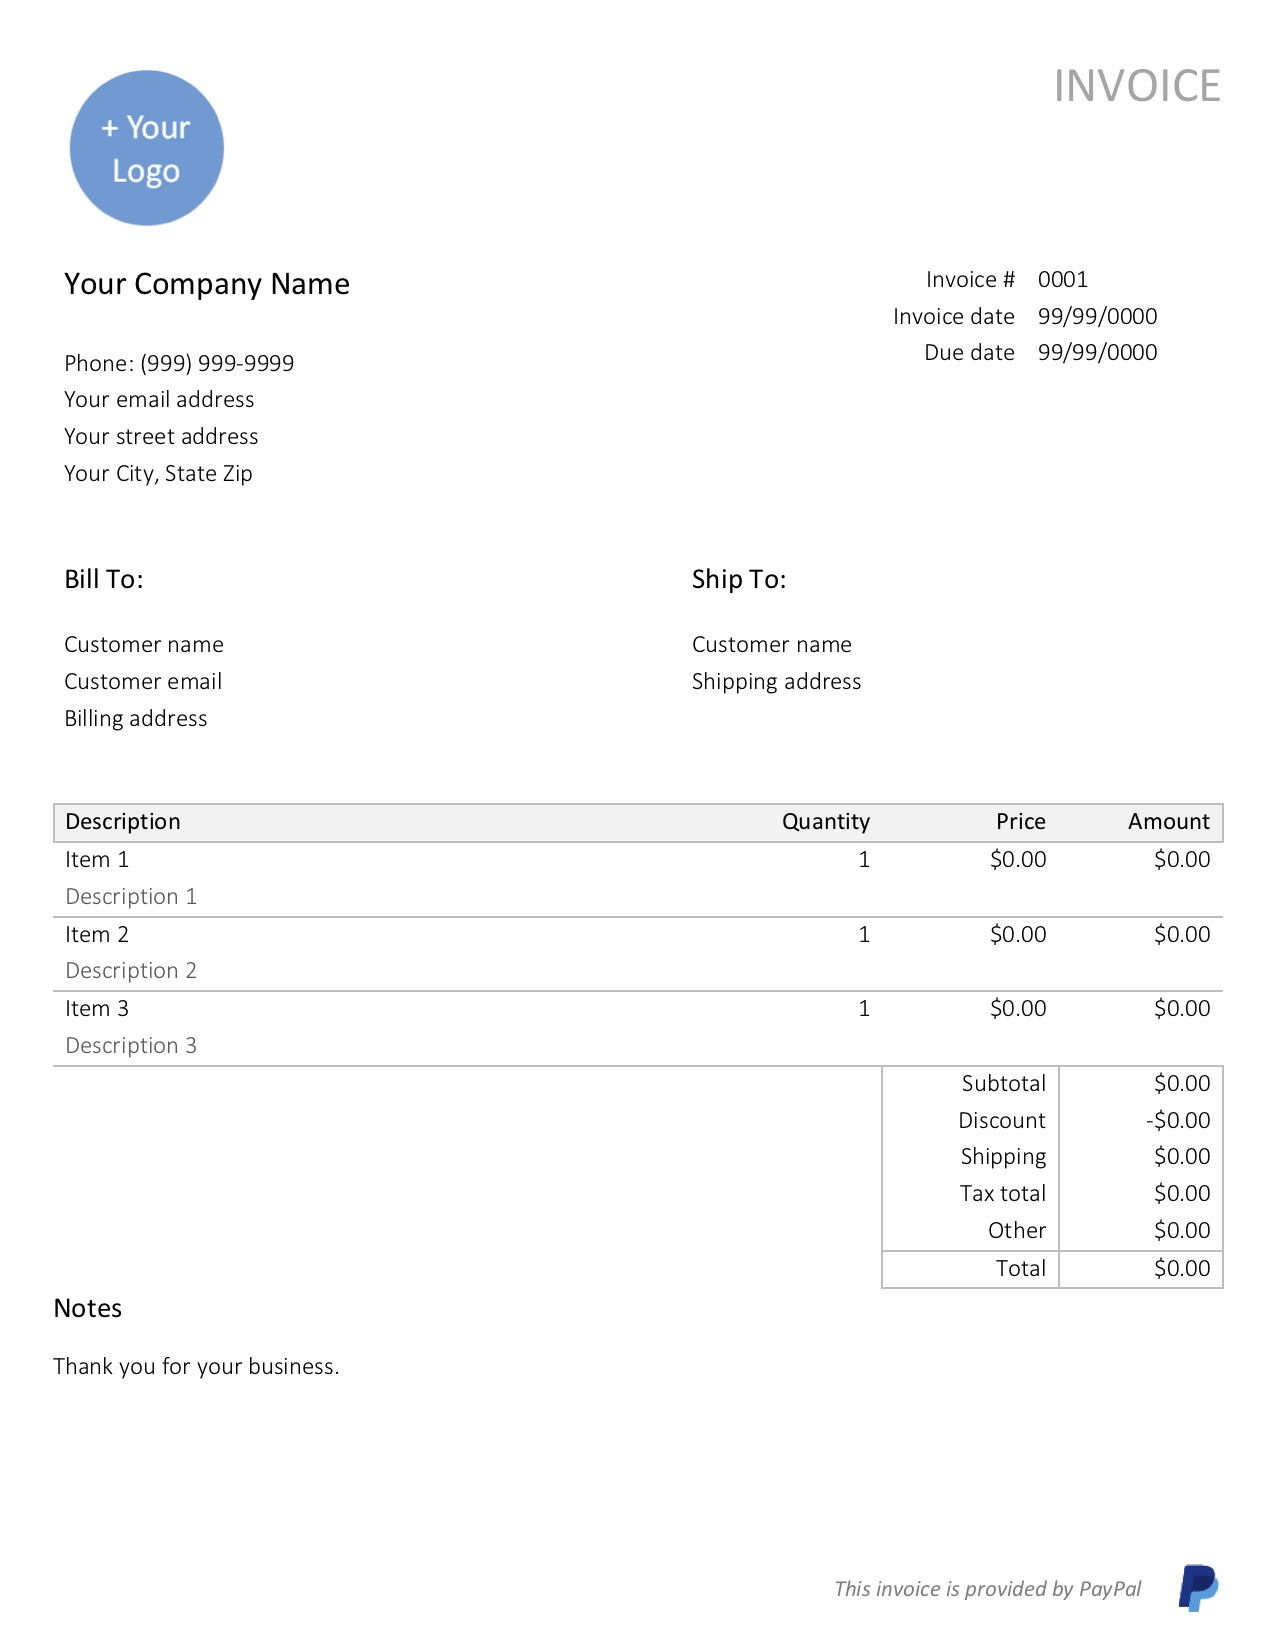 Free, Sample Invoice Template in Word PayPal Business Resource Center